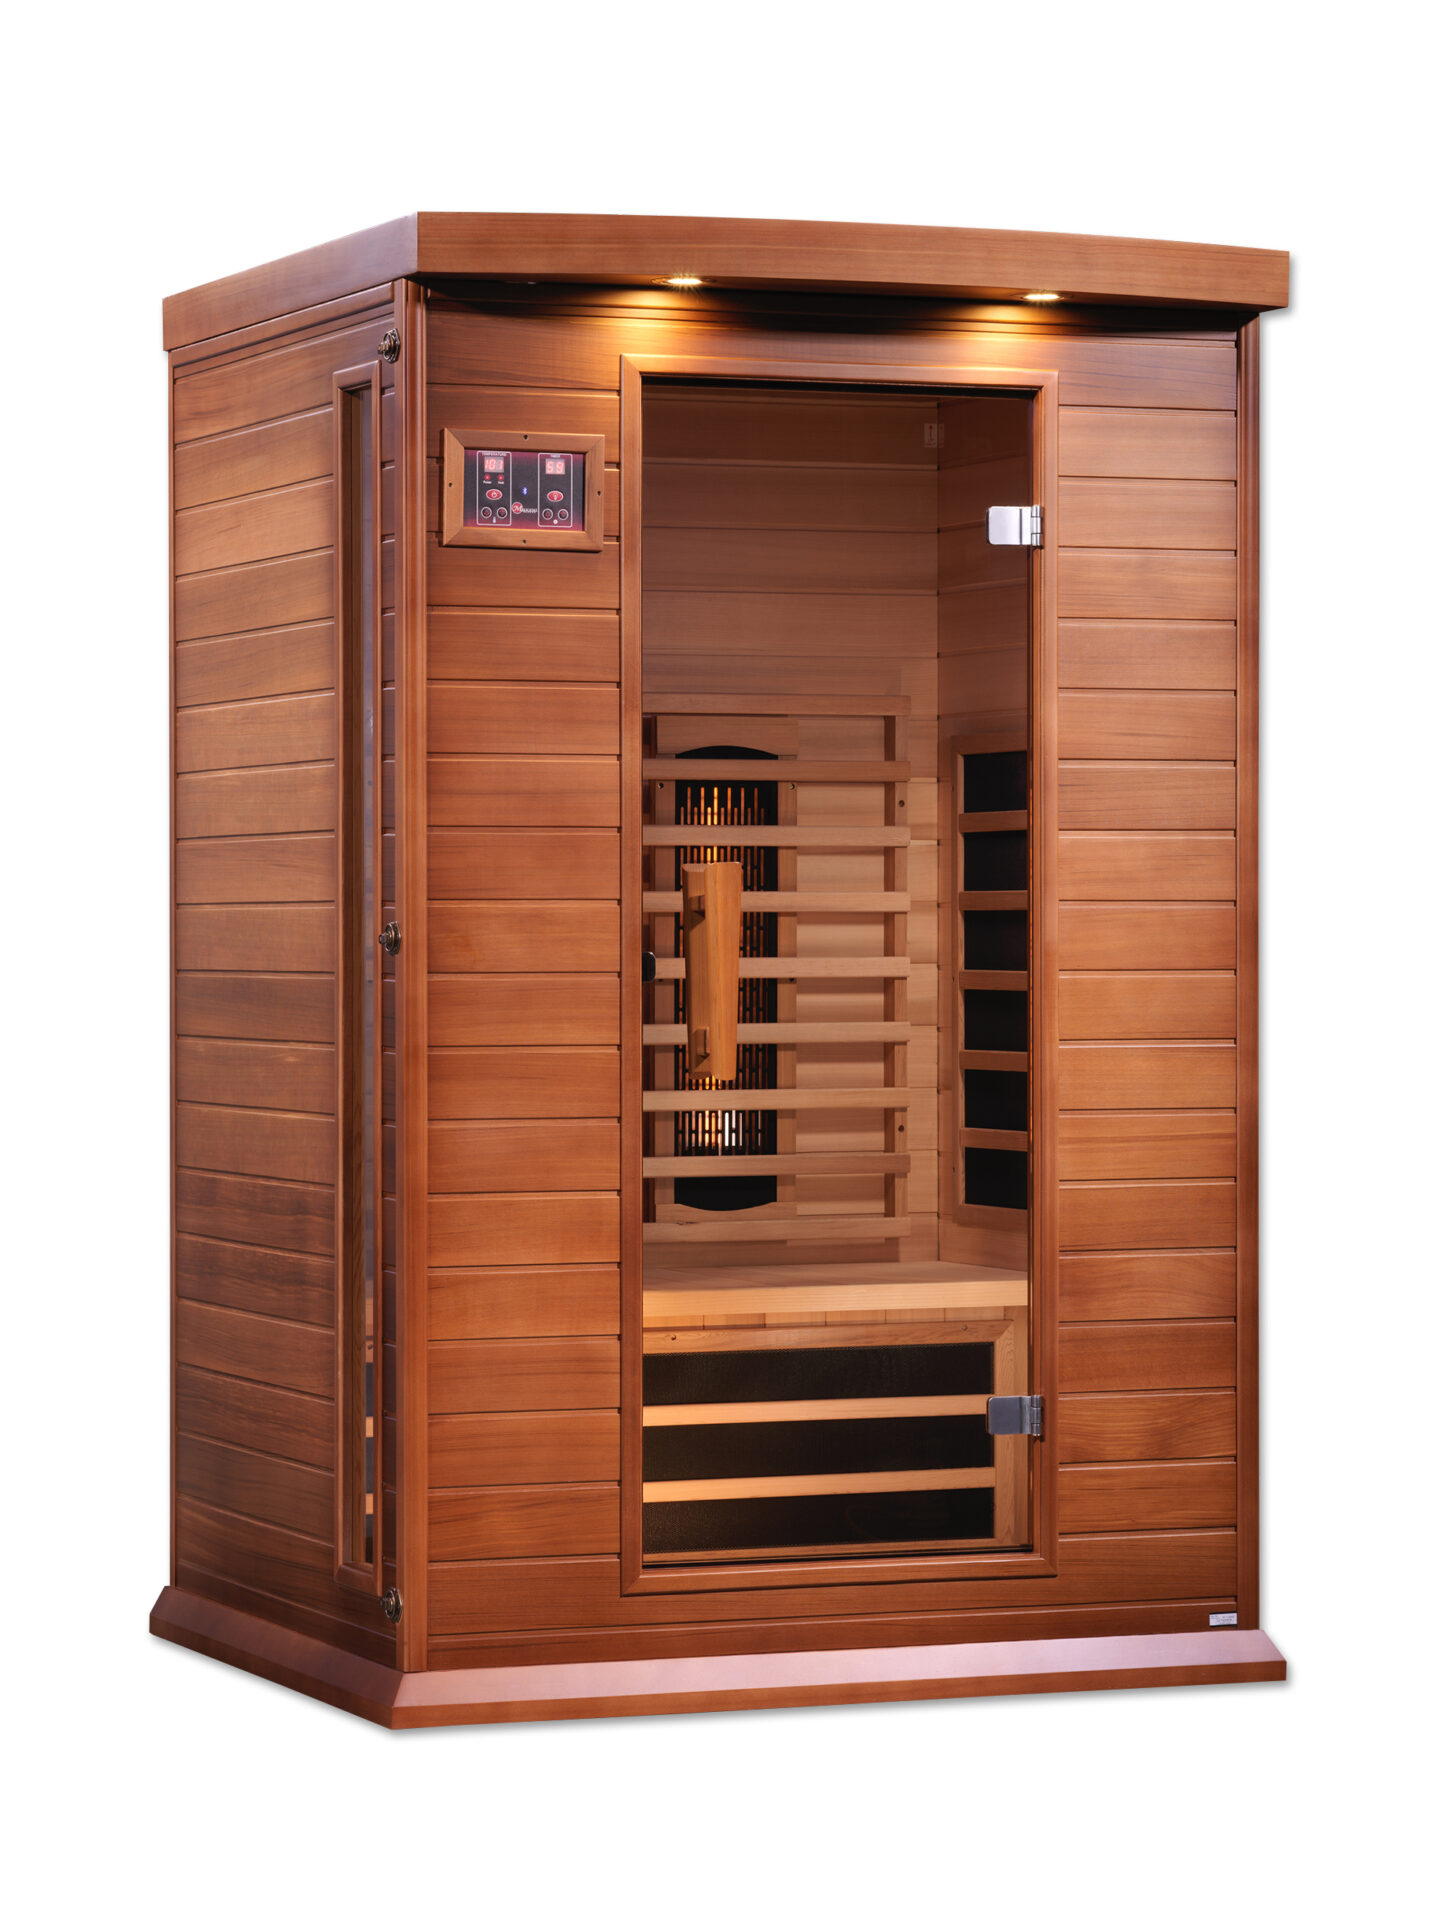 8 surprising ways sweating in an infrared sauna could support overall health